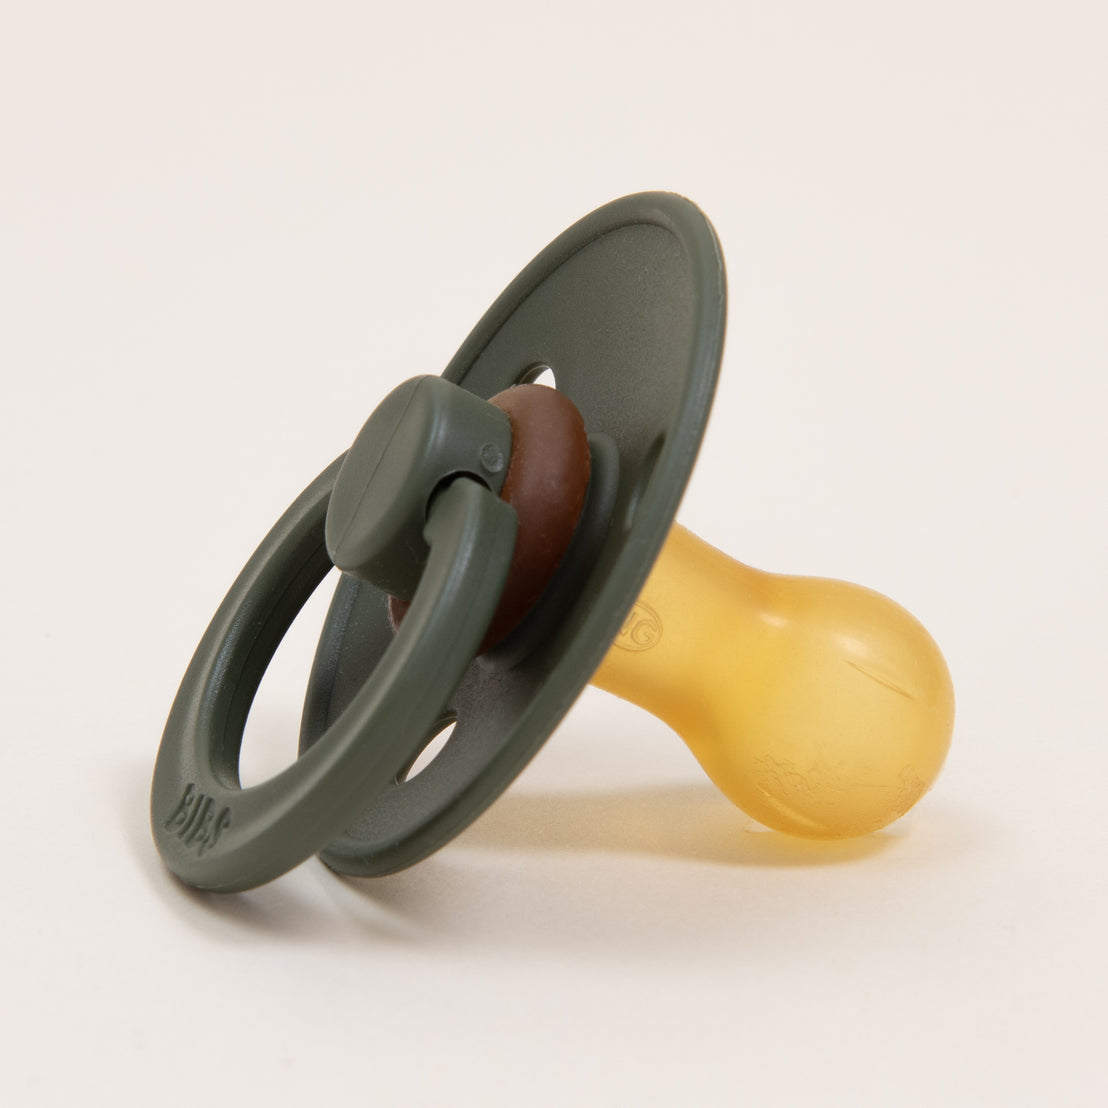 A close-up of a gray Bibs Pacifier in Hunter with a circular handle, set against a plain light background.